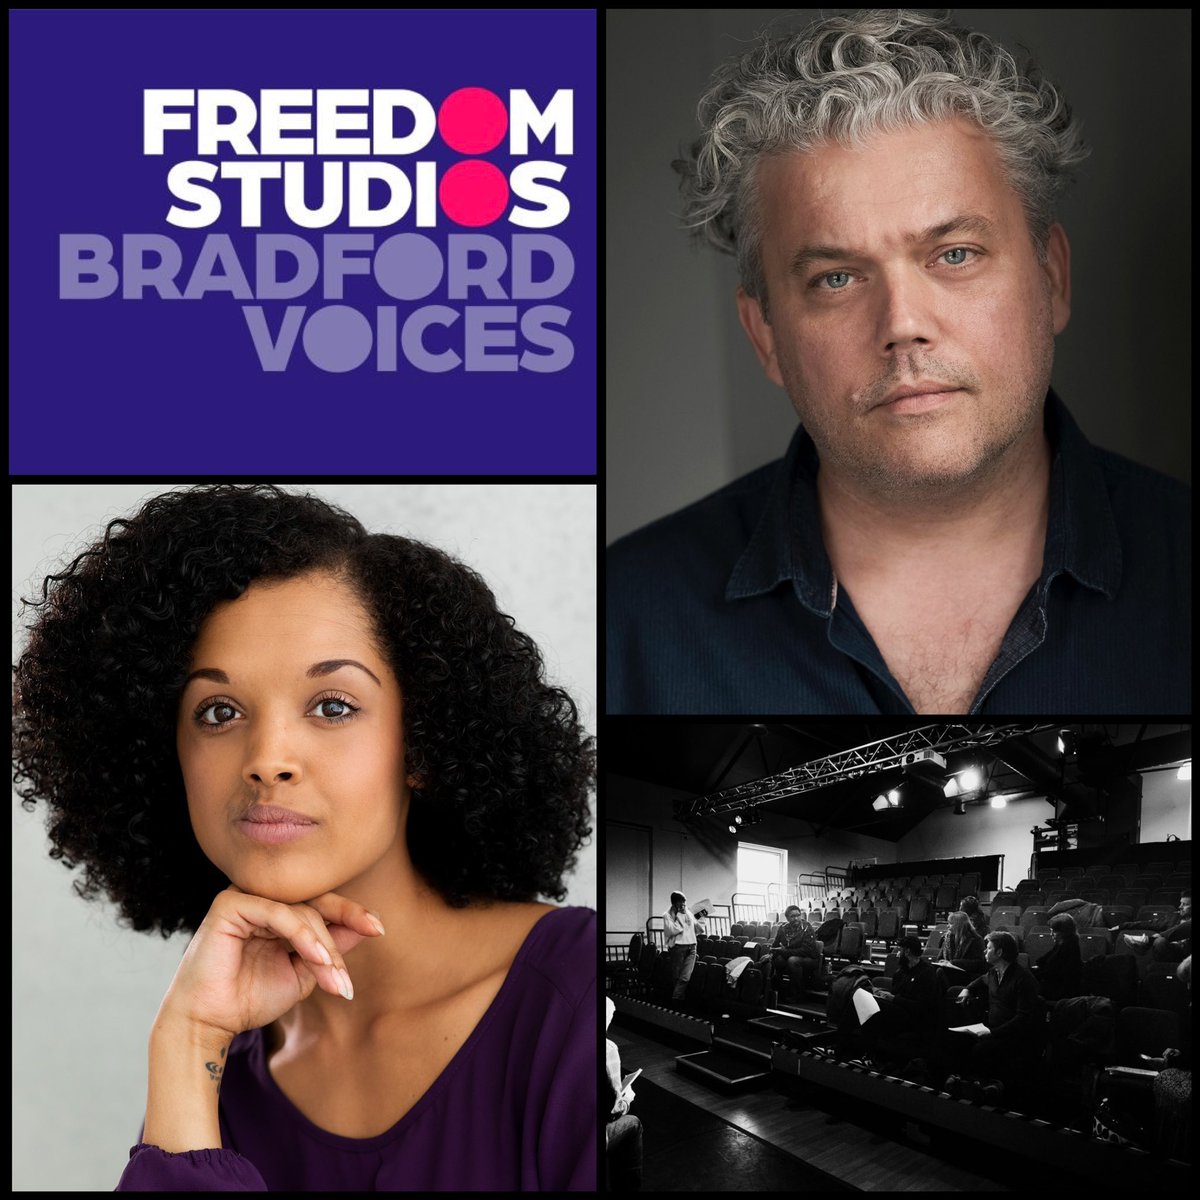 Clients #DanCarey and #RhiannonCanovilleOrd booked to read exciting new work for the Writers Studio Group @Freedom_Studios this week. Find out more about Dan and Rhiannon here northofwatford.com @Rhi_Can_O